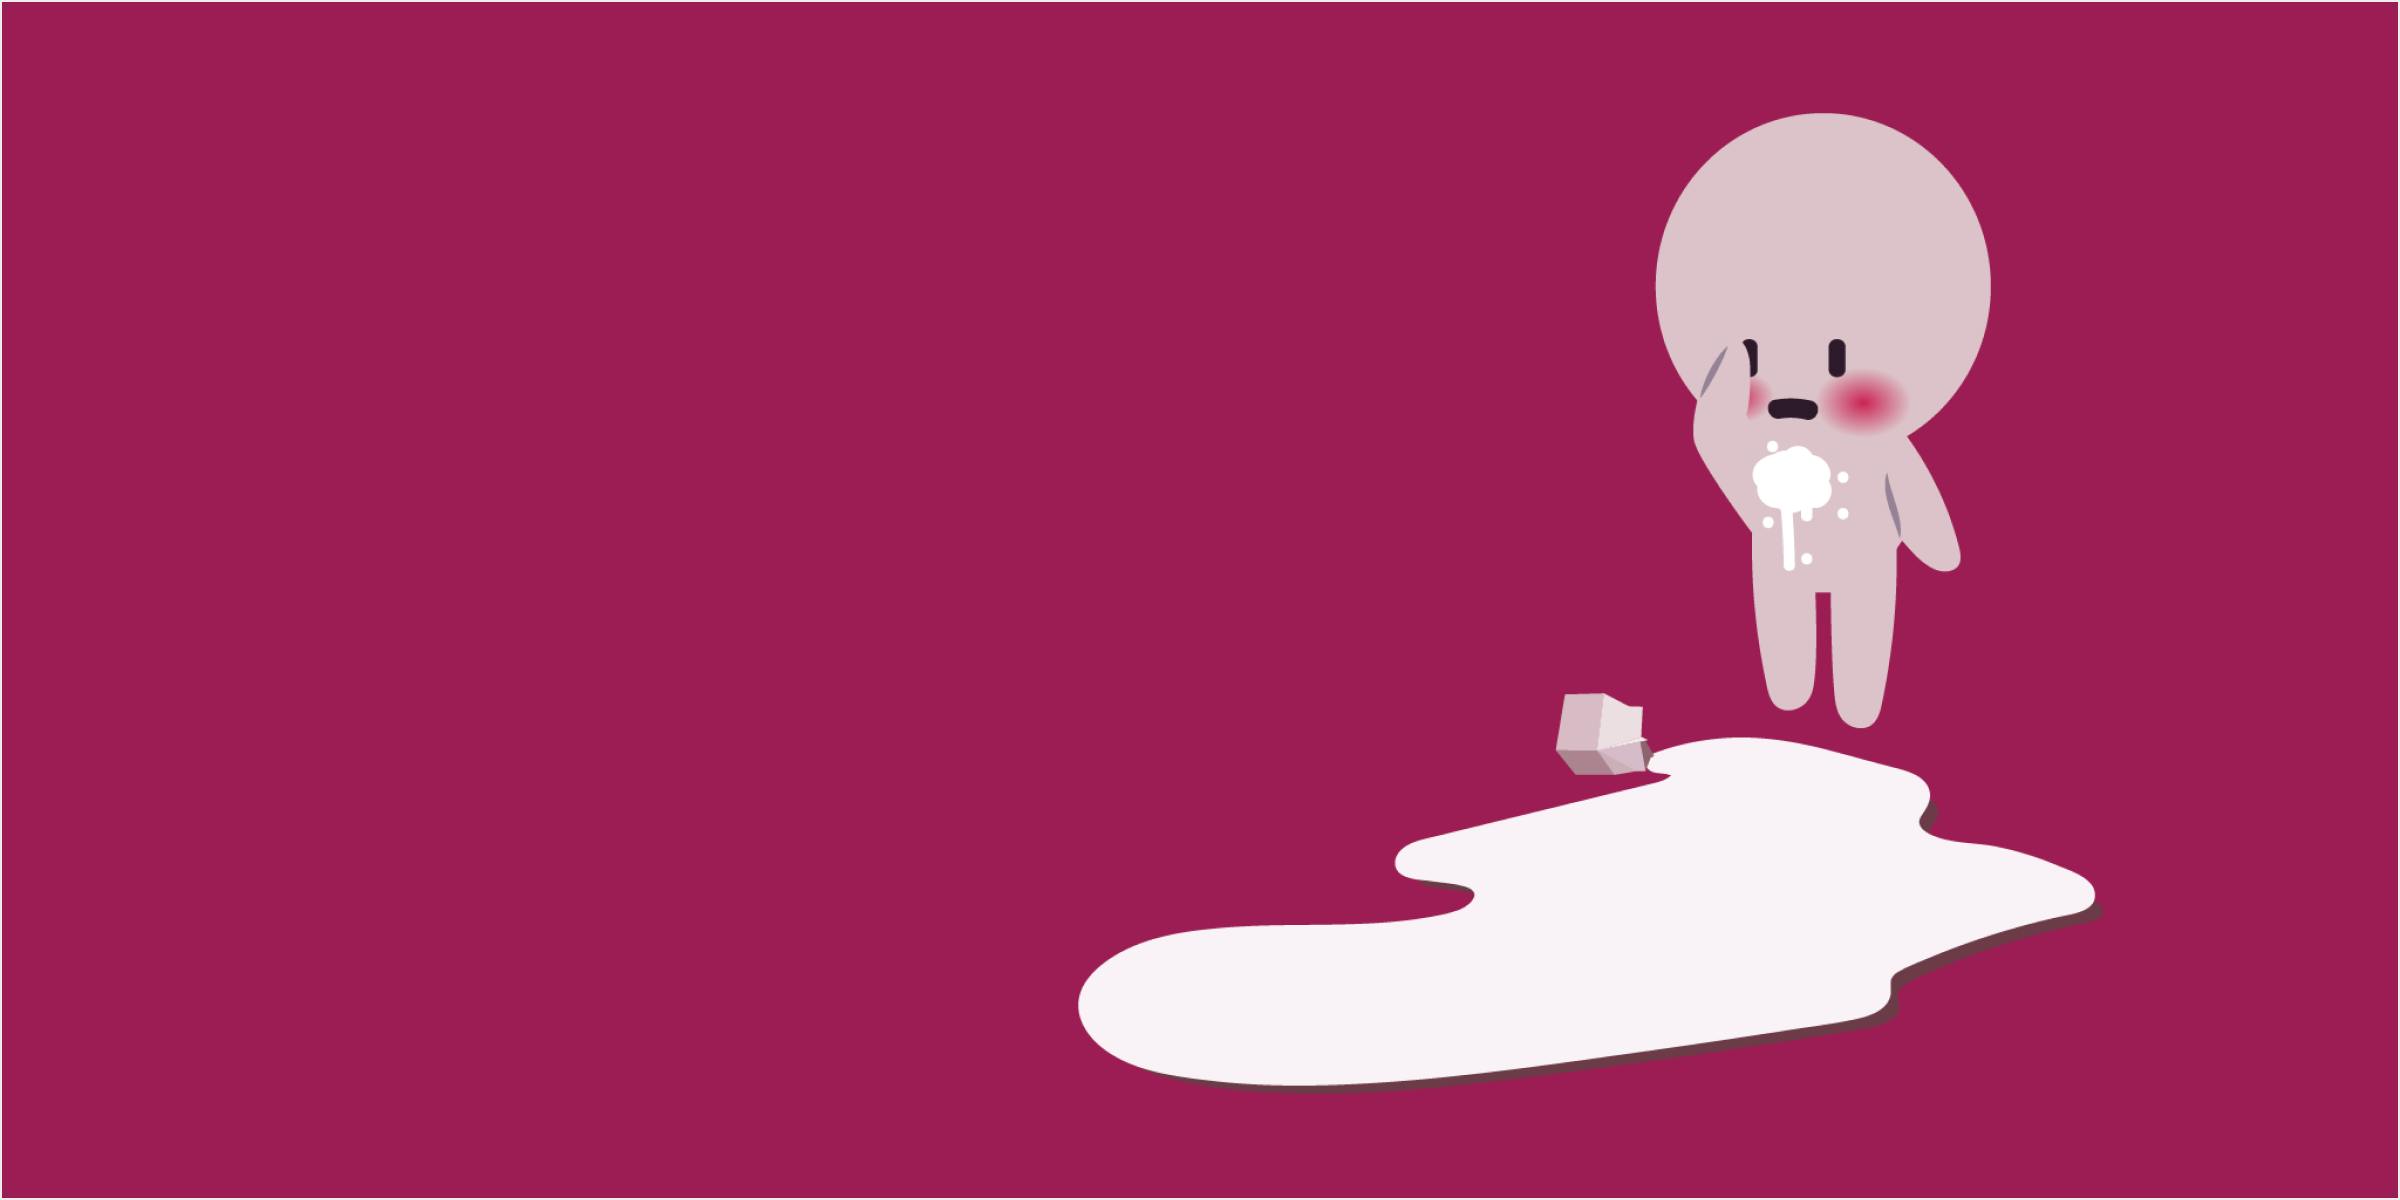 An illustration of a character who has spilled her milk and she looked embarrassed by it